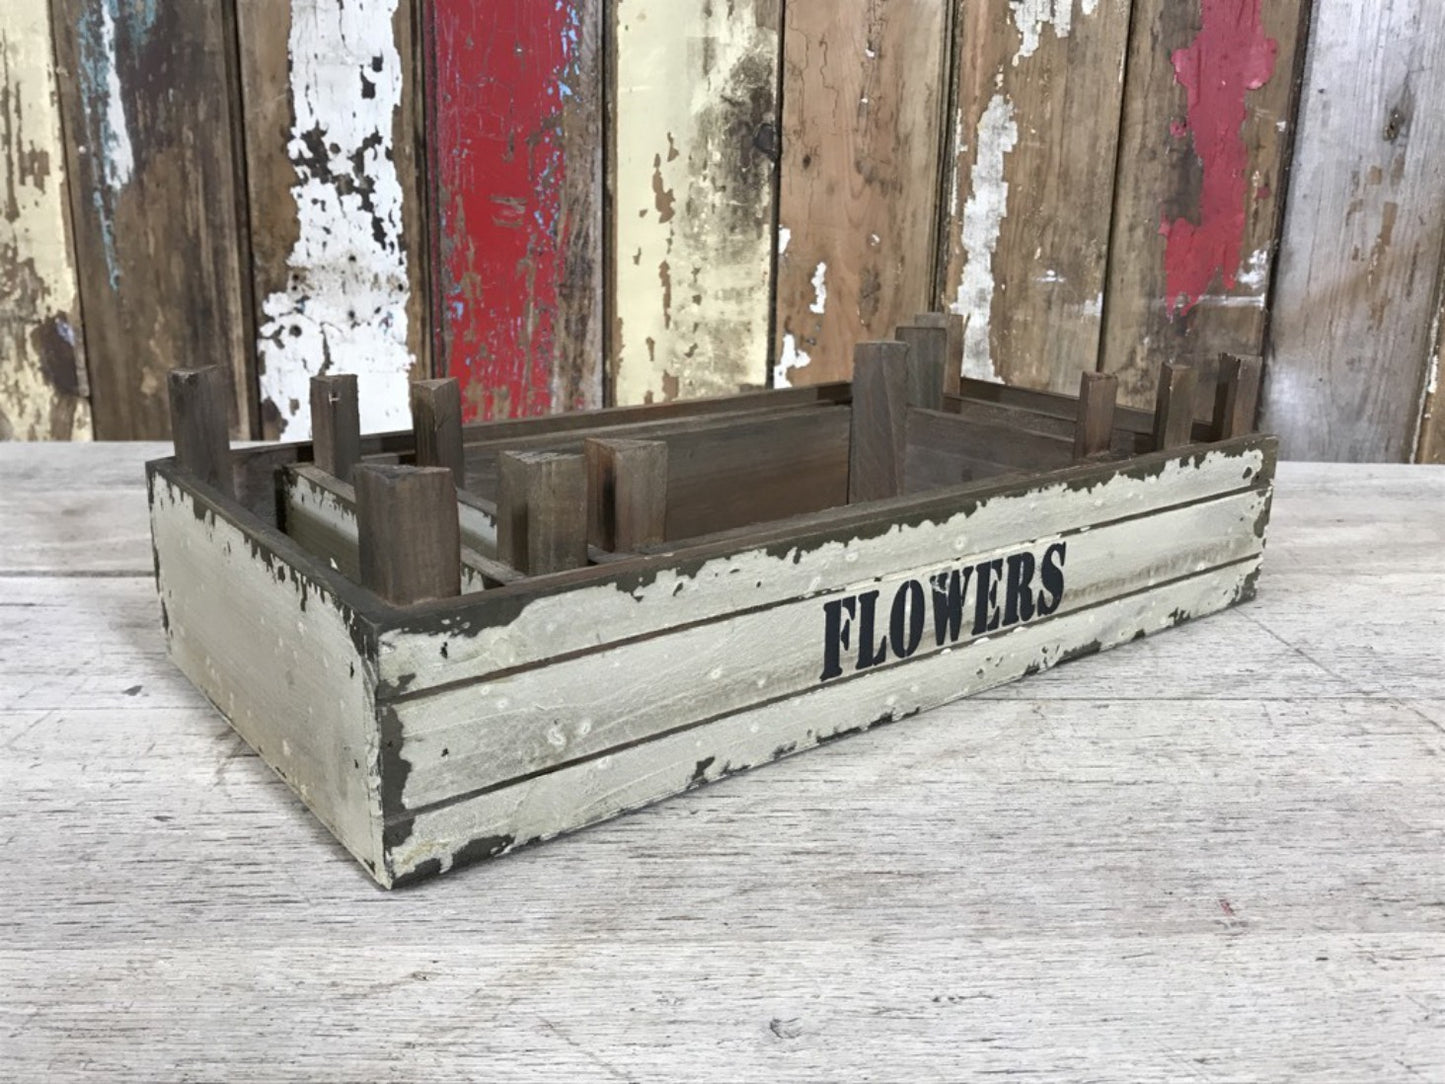 Set of 3 Wooden Painted Flower Shallow Trays Crates Small Medium Large